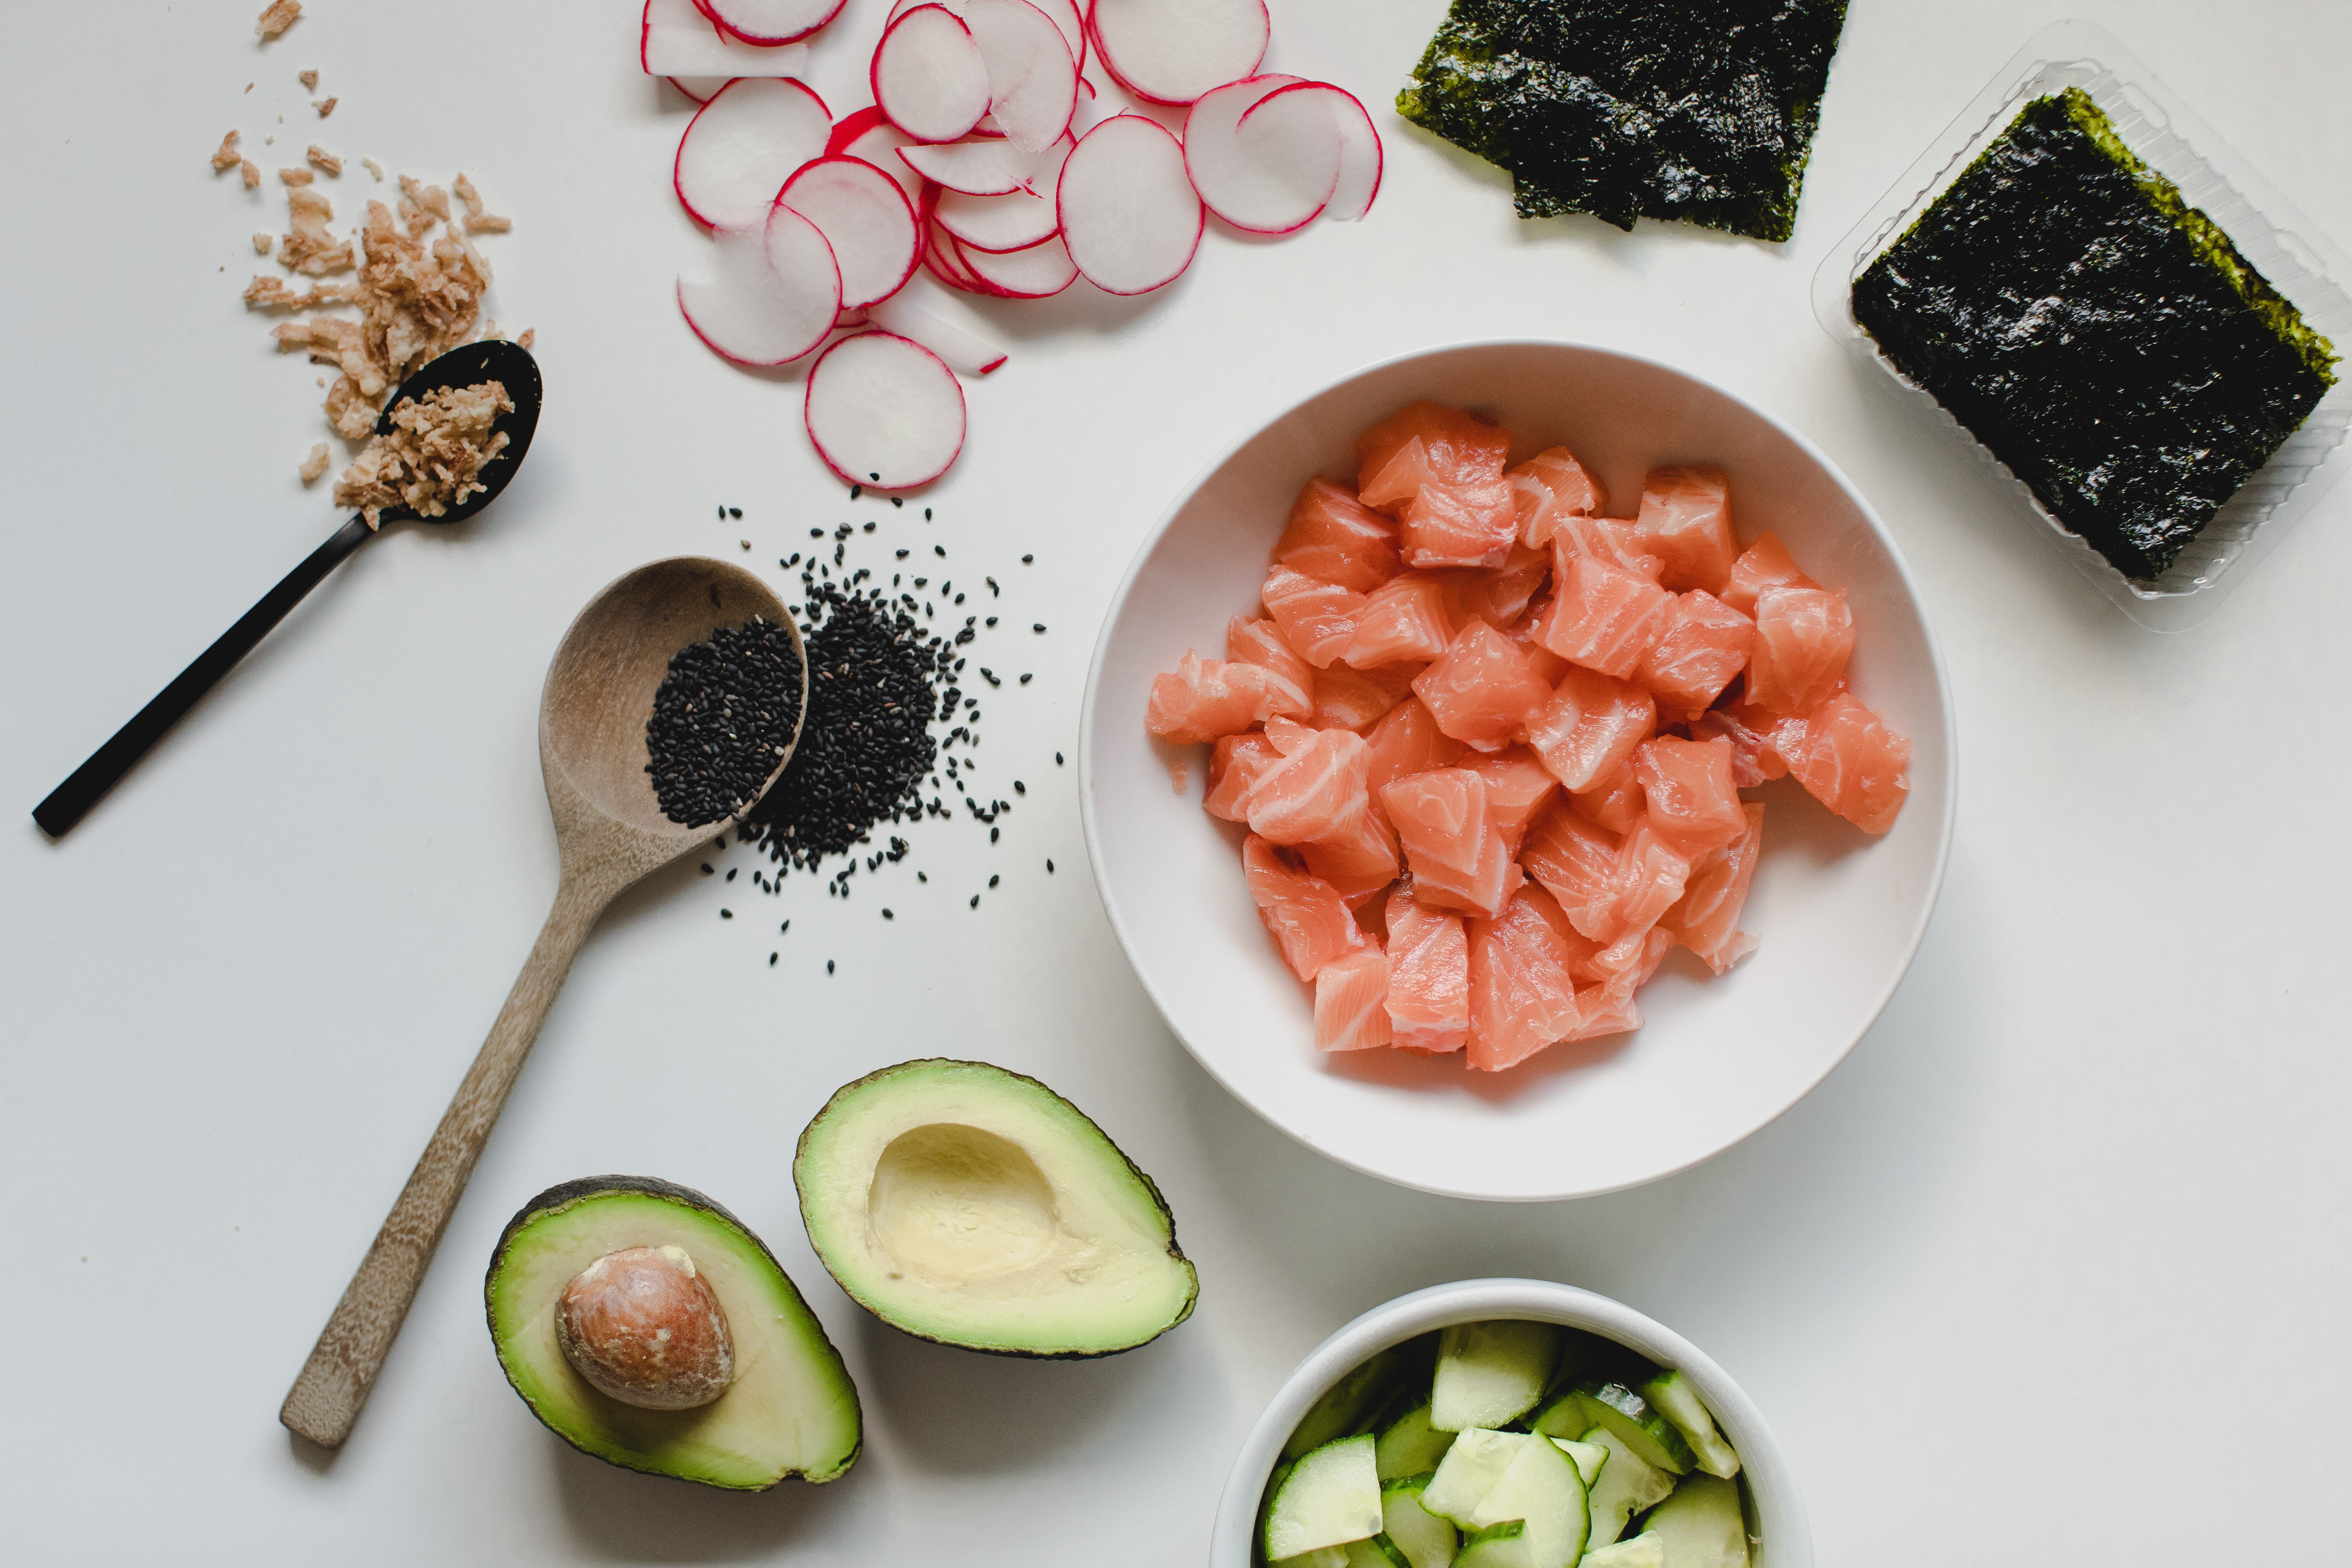 Salmon, avocados, cucumbers, and radishes on a table.